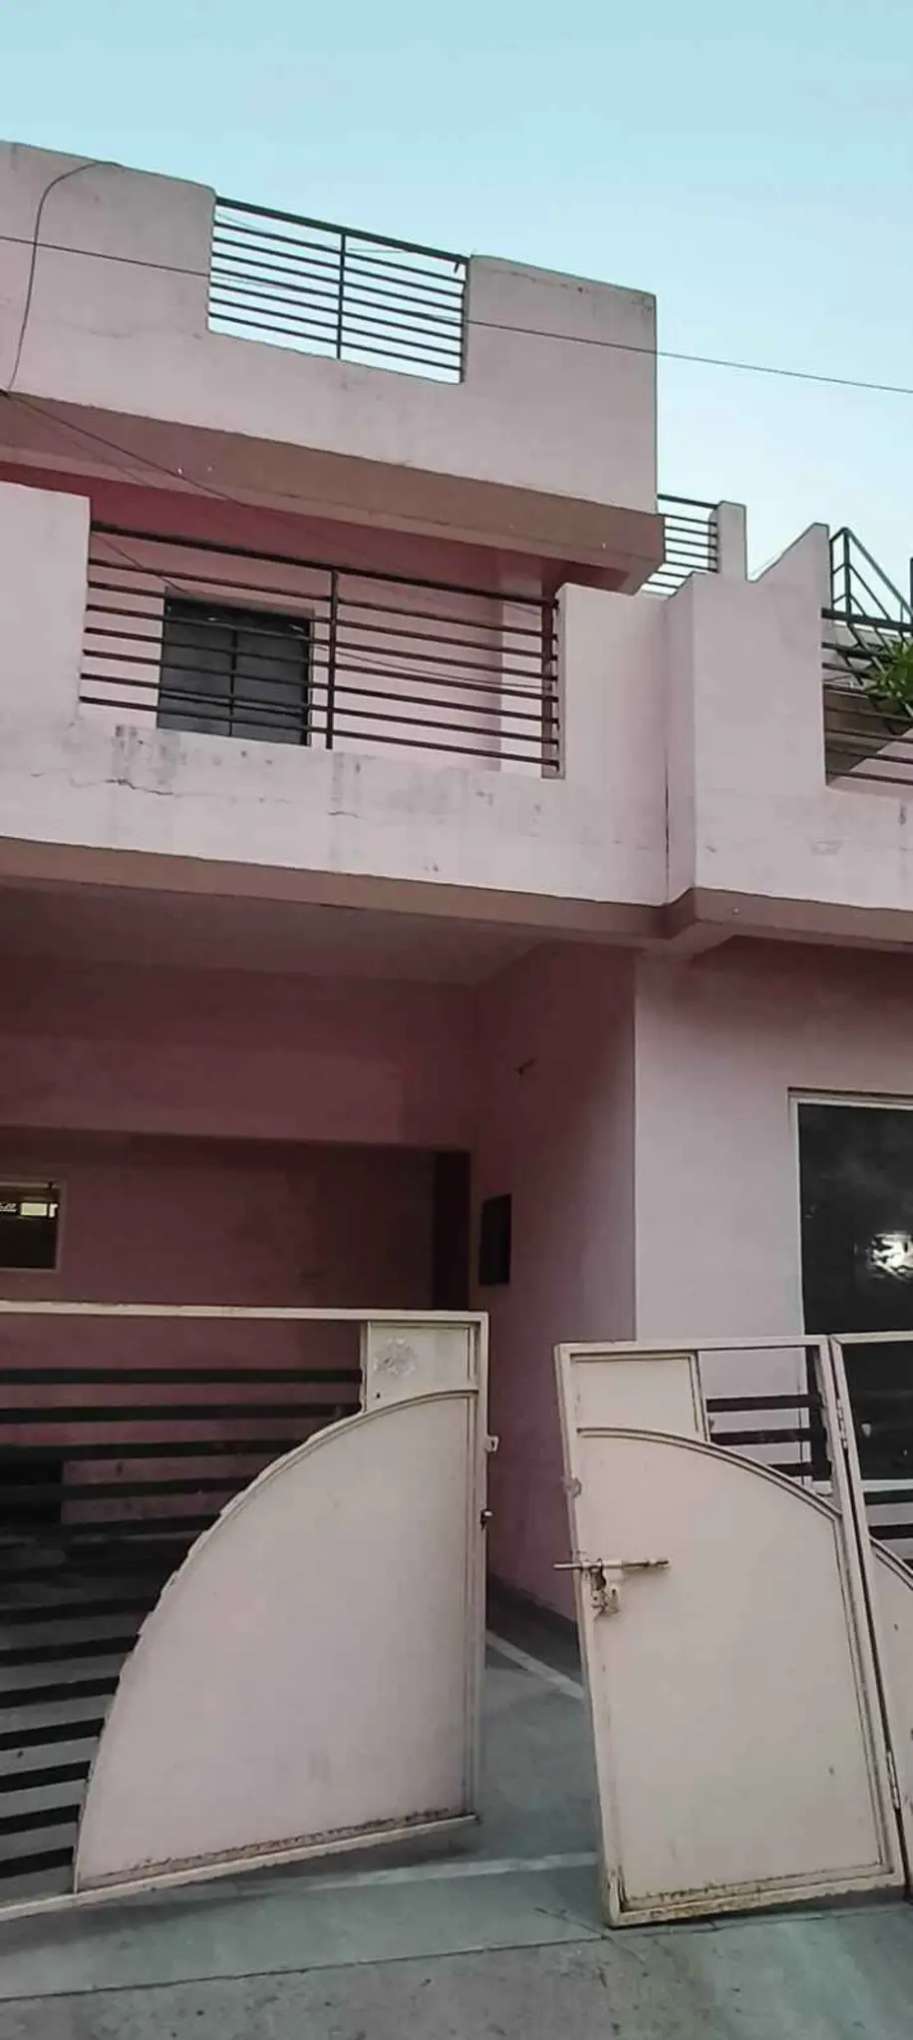 3 Bed/ 3 Bath Sell House/ Bungalow/ Villa; 800 sq. ft. lot for sale @Gate no. 5 ayodhya bypass bhopal